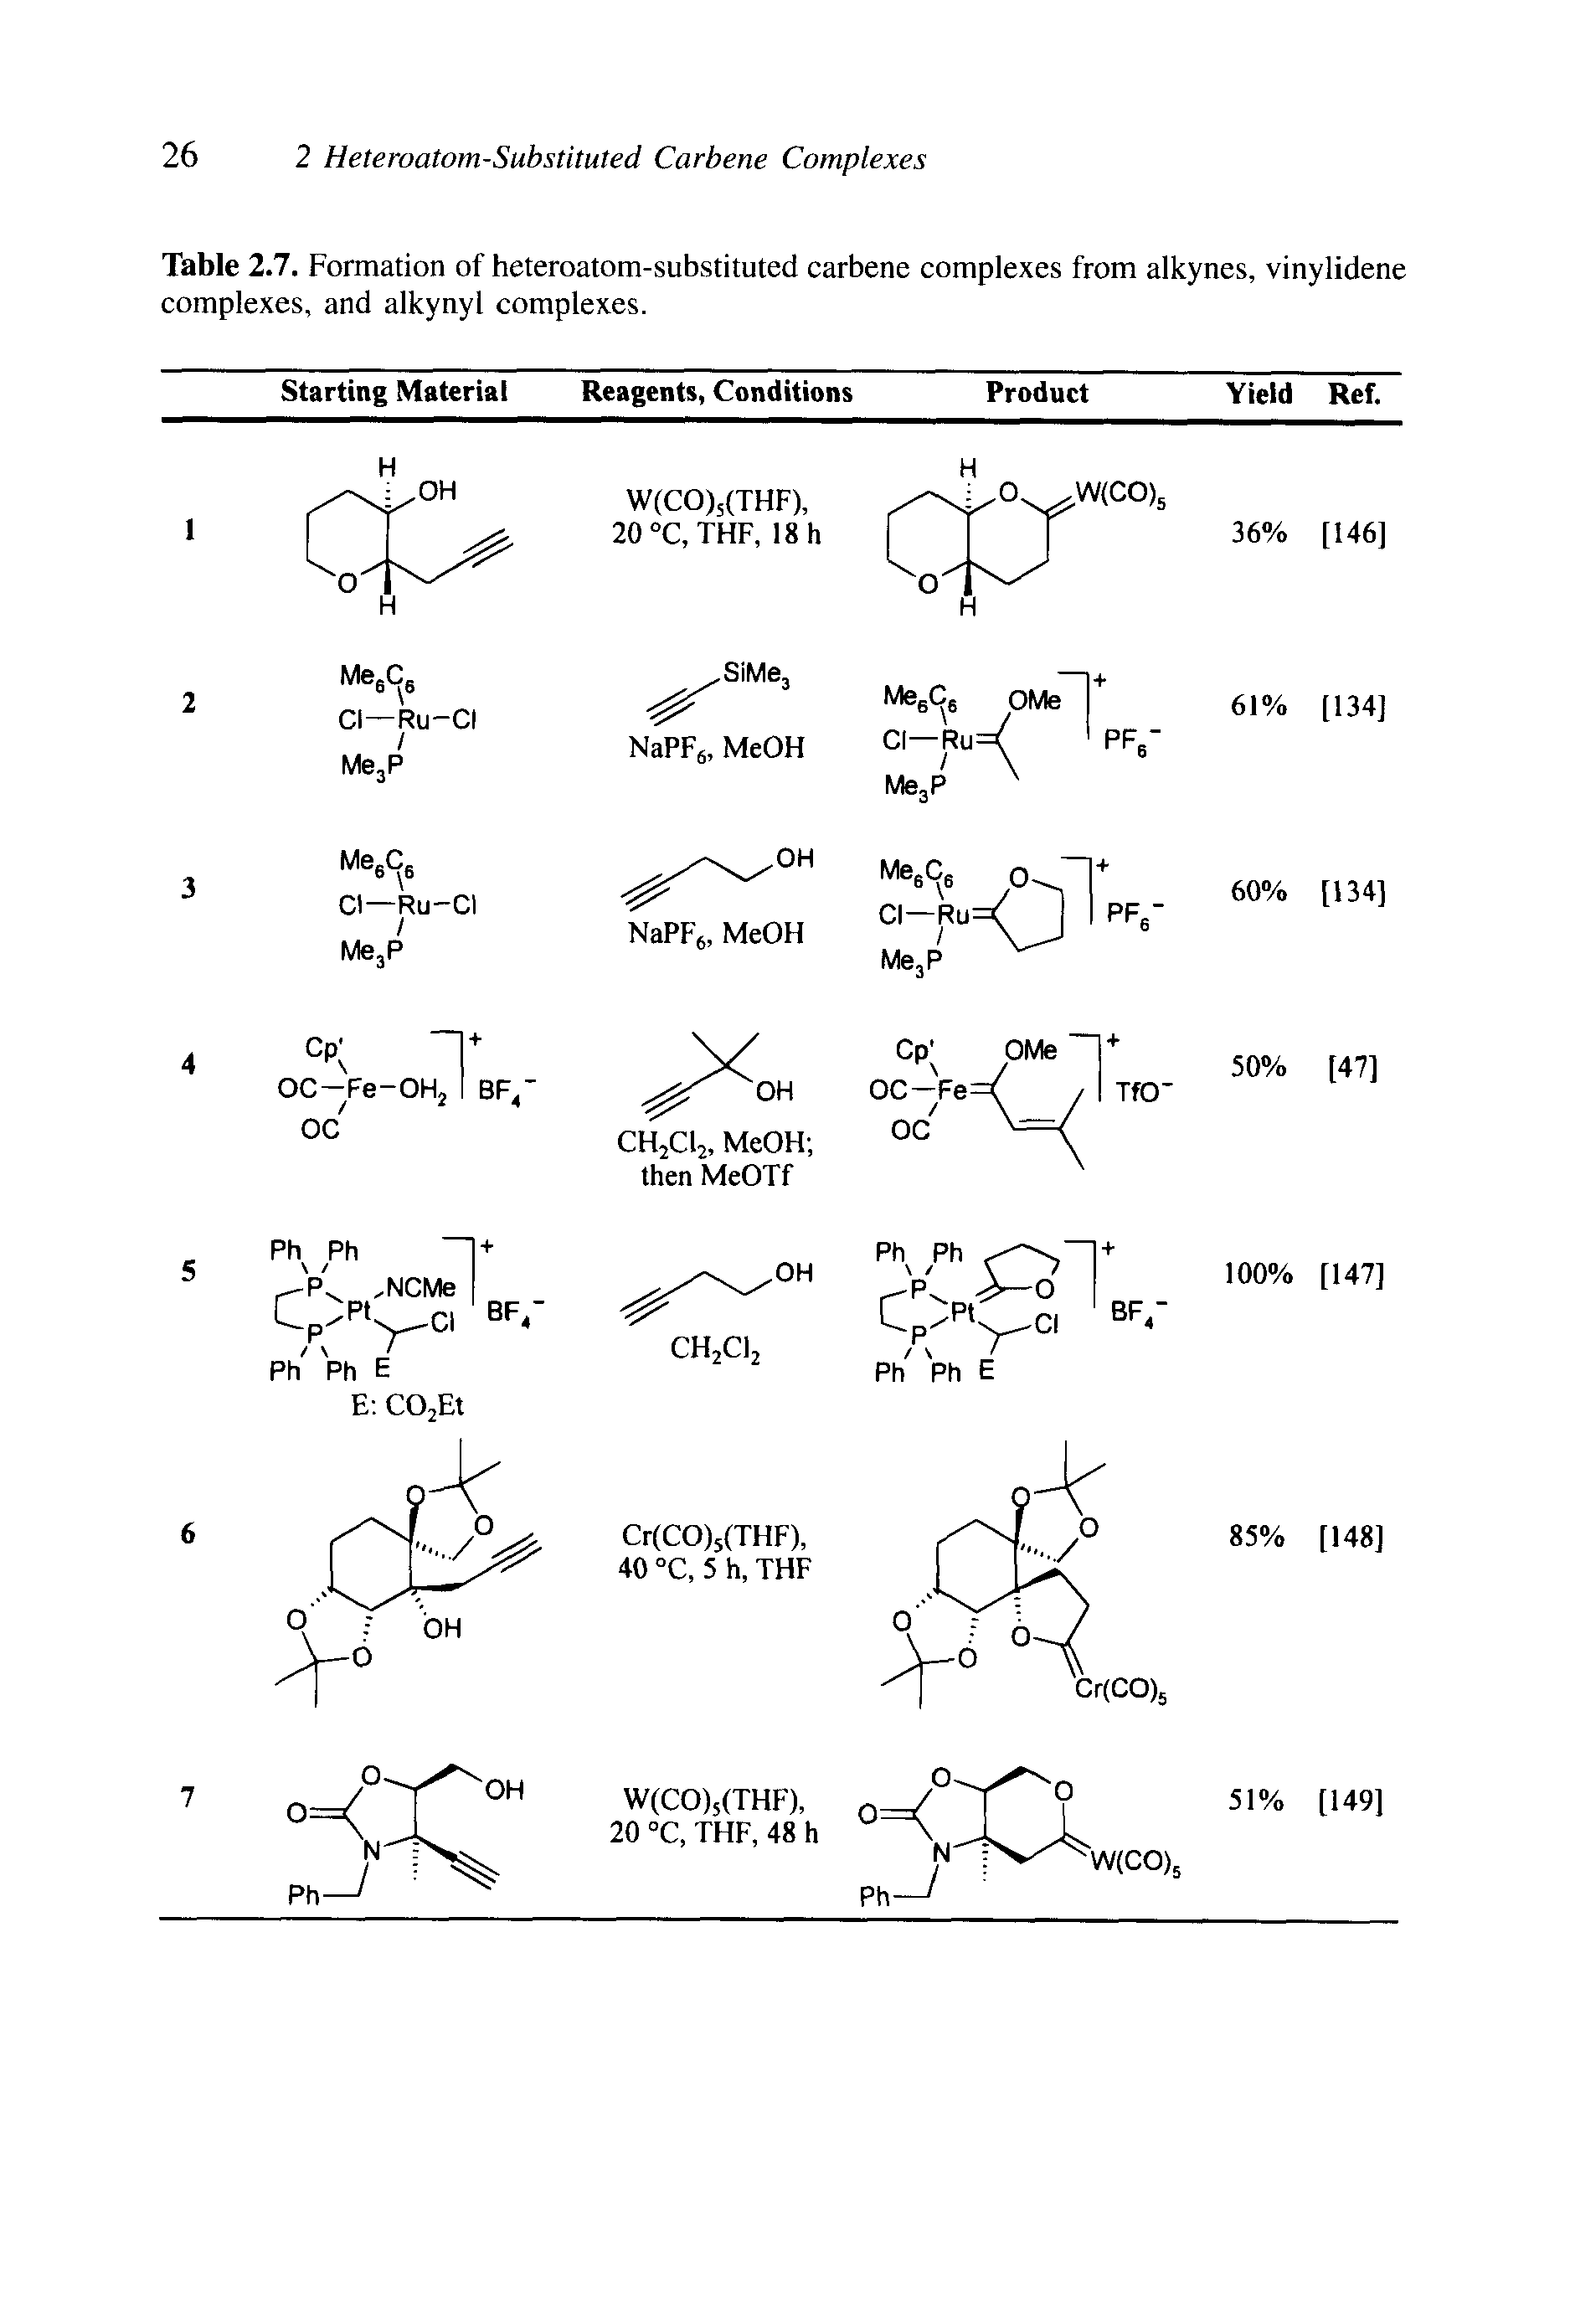 Table 2.7. Formation of heteroatom-substituted carbene complexes from alkynes, vinylidene complexes, and alkynyl complexes.